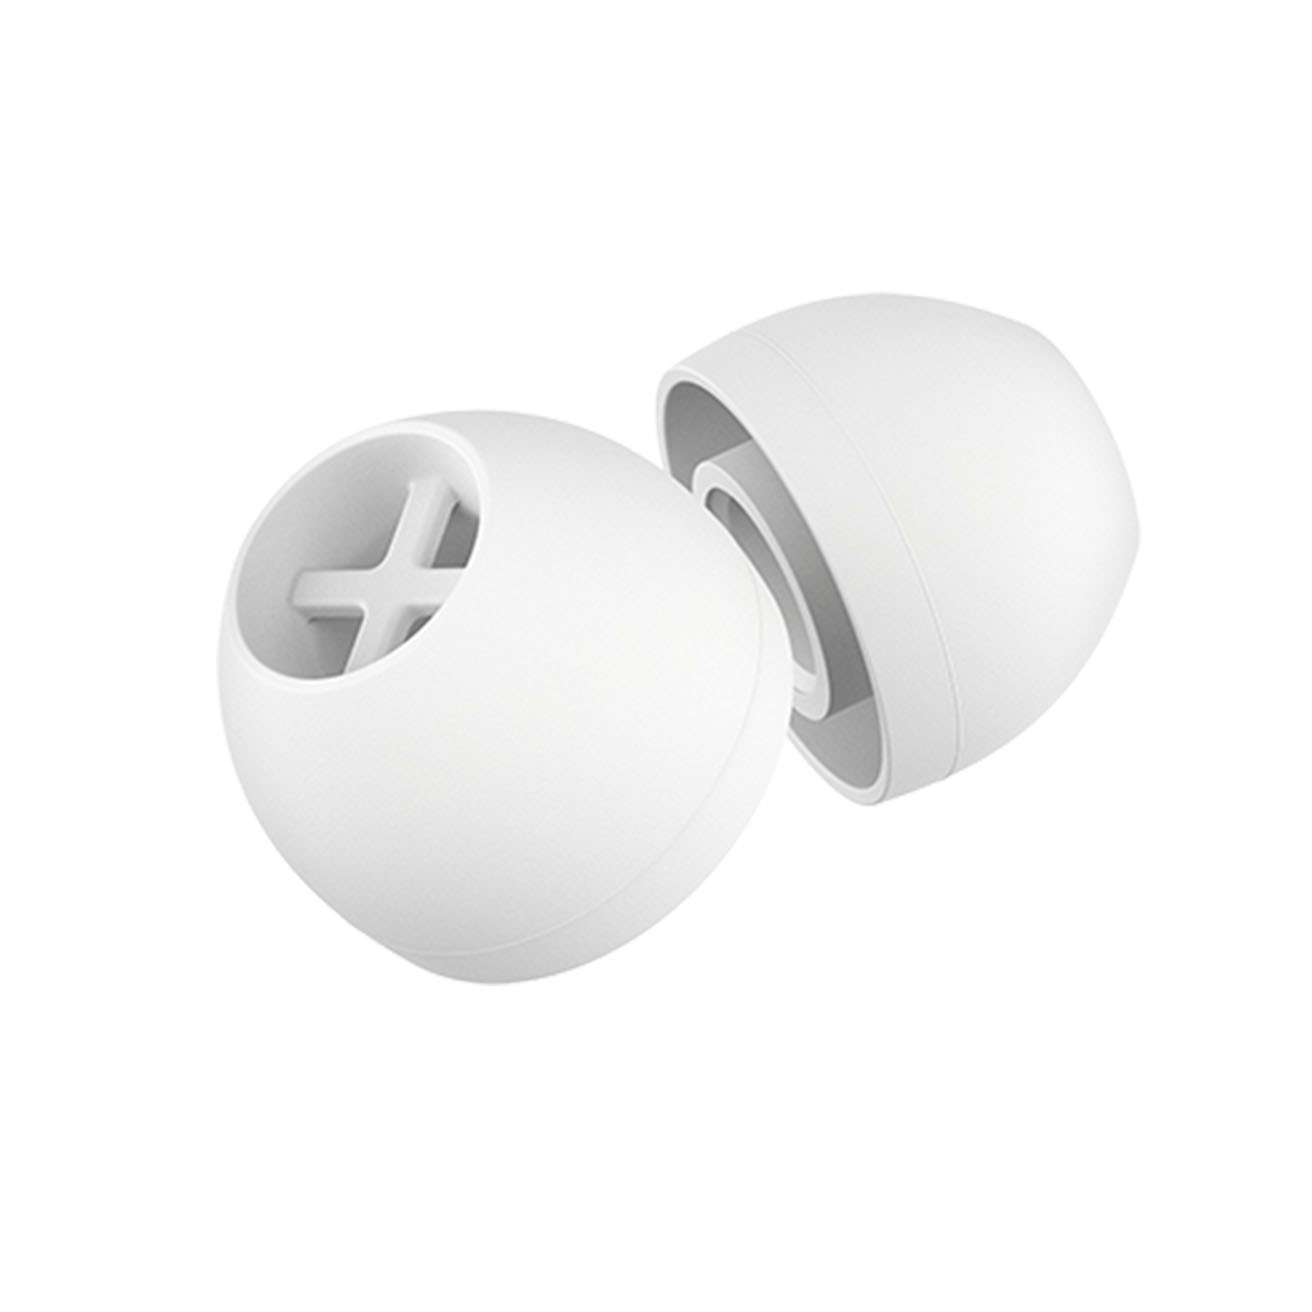 EAR ADAPTER WHITE XS, 5PAIR